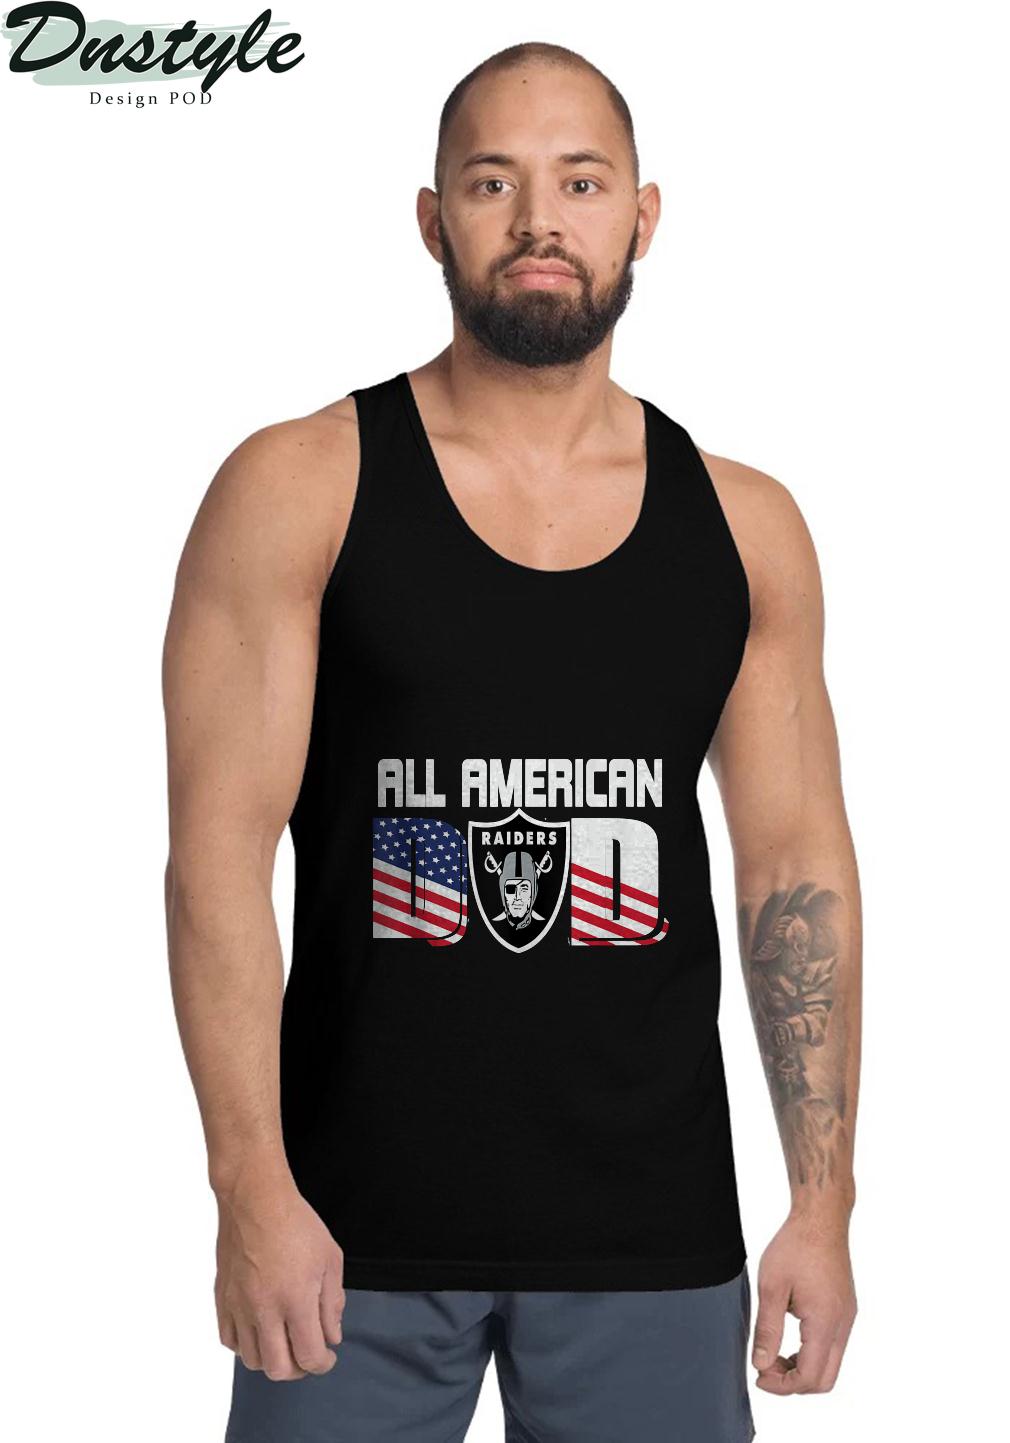 All American Raiders Dad 4th of July Fathers Day Tank Top